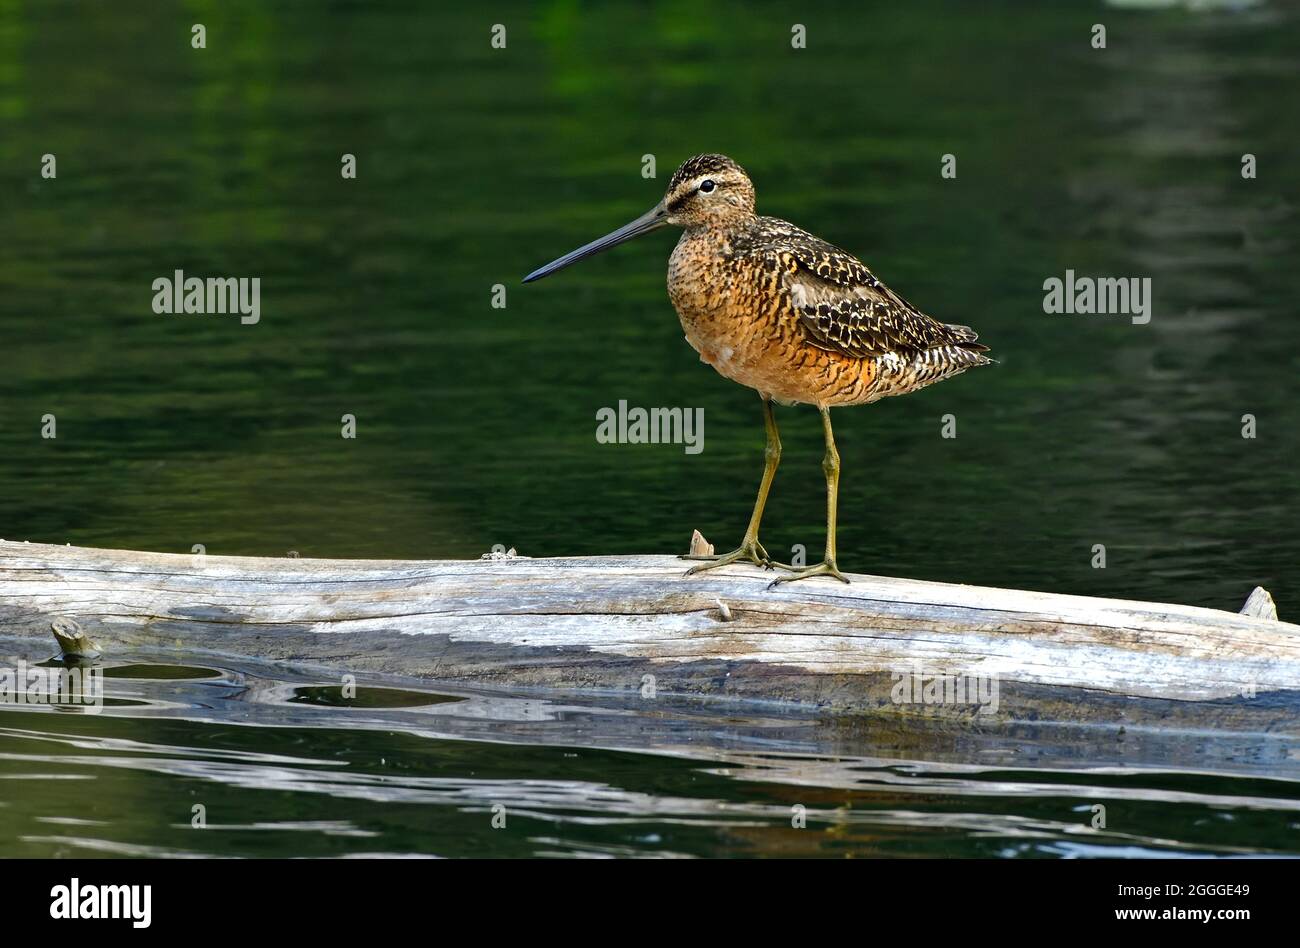 A Long-billed Dowitcher (Limnodromus scolopaceus), shorebird perched on a sunken log in rural Alberta Canada. Stock Photo